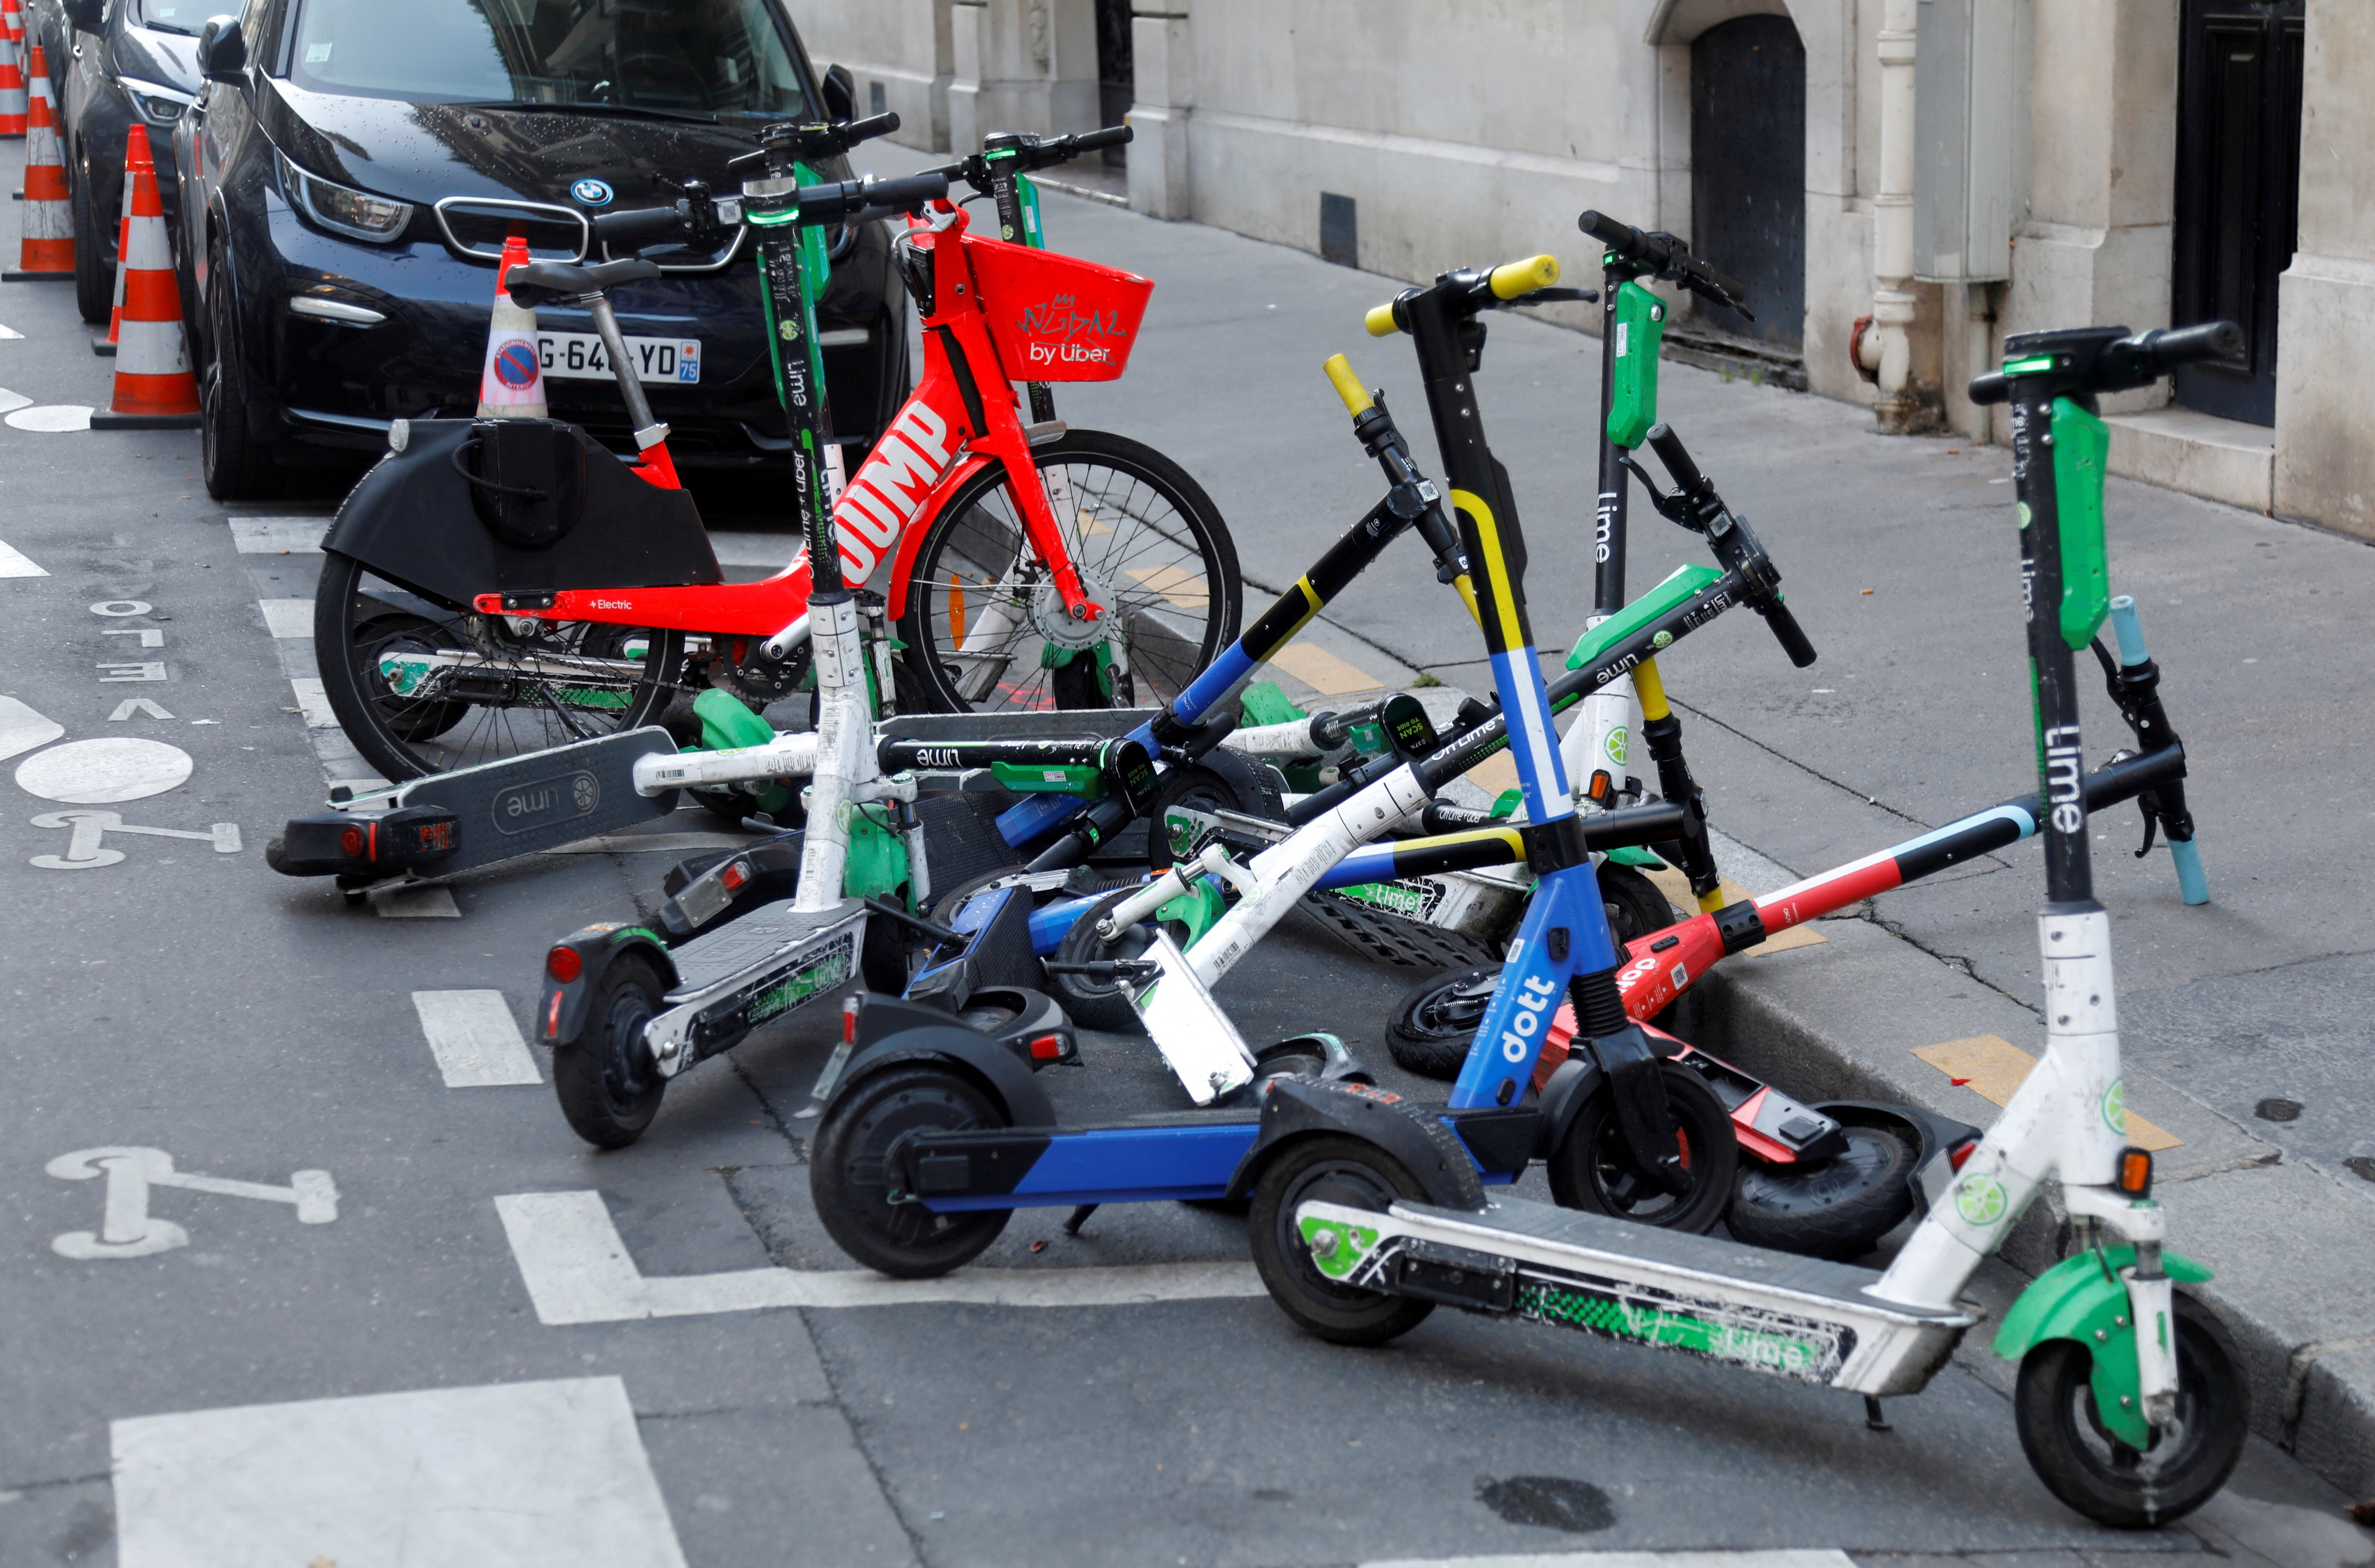 Dock-free electric scooters parked in Paris